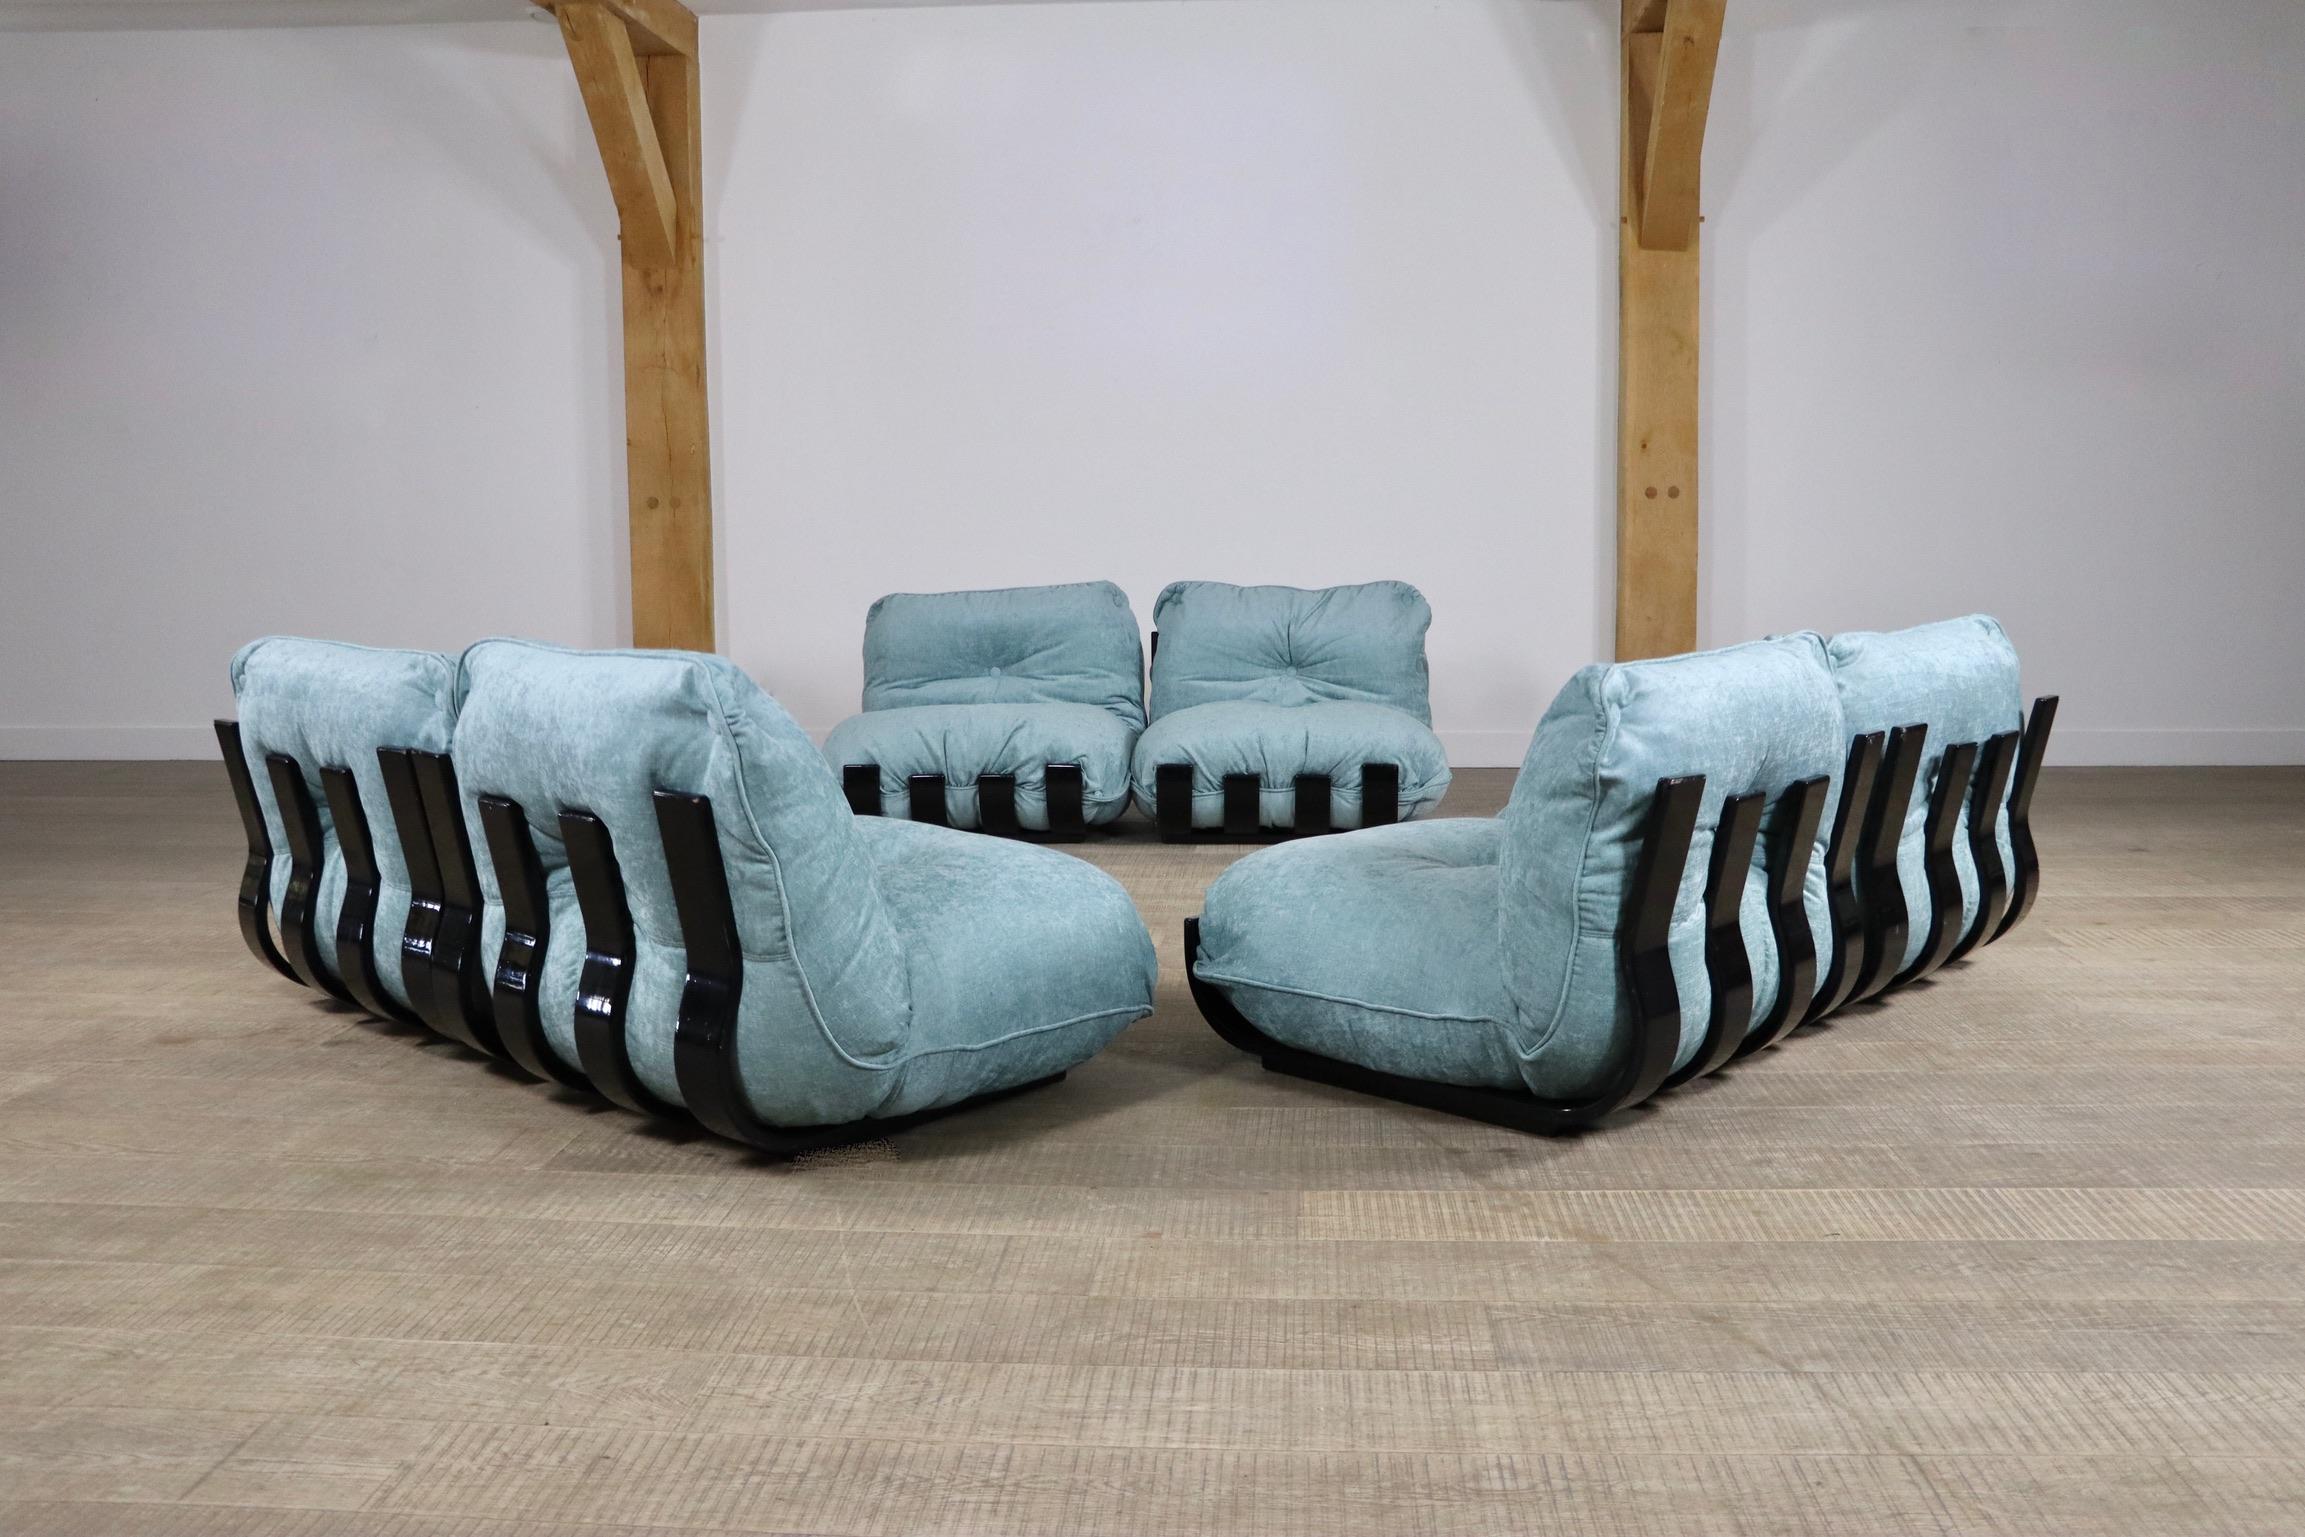 Sectional Gran Visir Sofa in Blue Velvet by Luciano Frigerio, Italy, 1970s For Sale 9